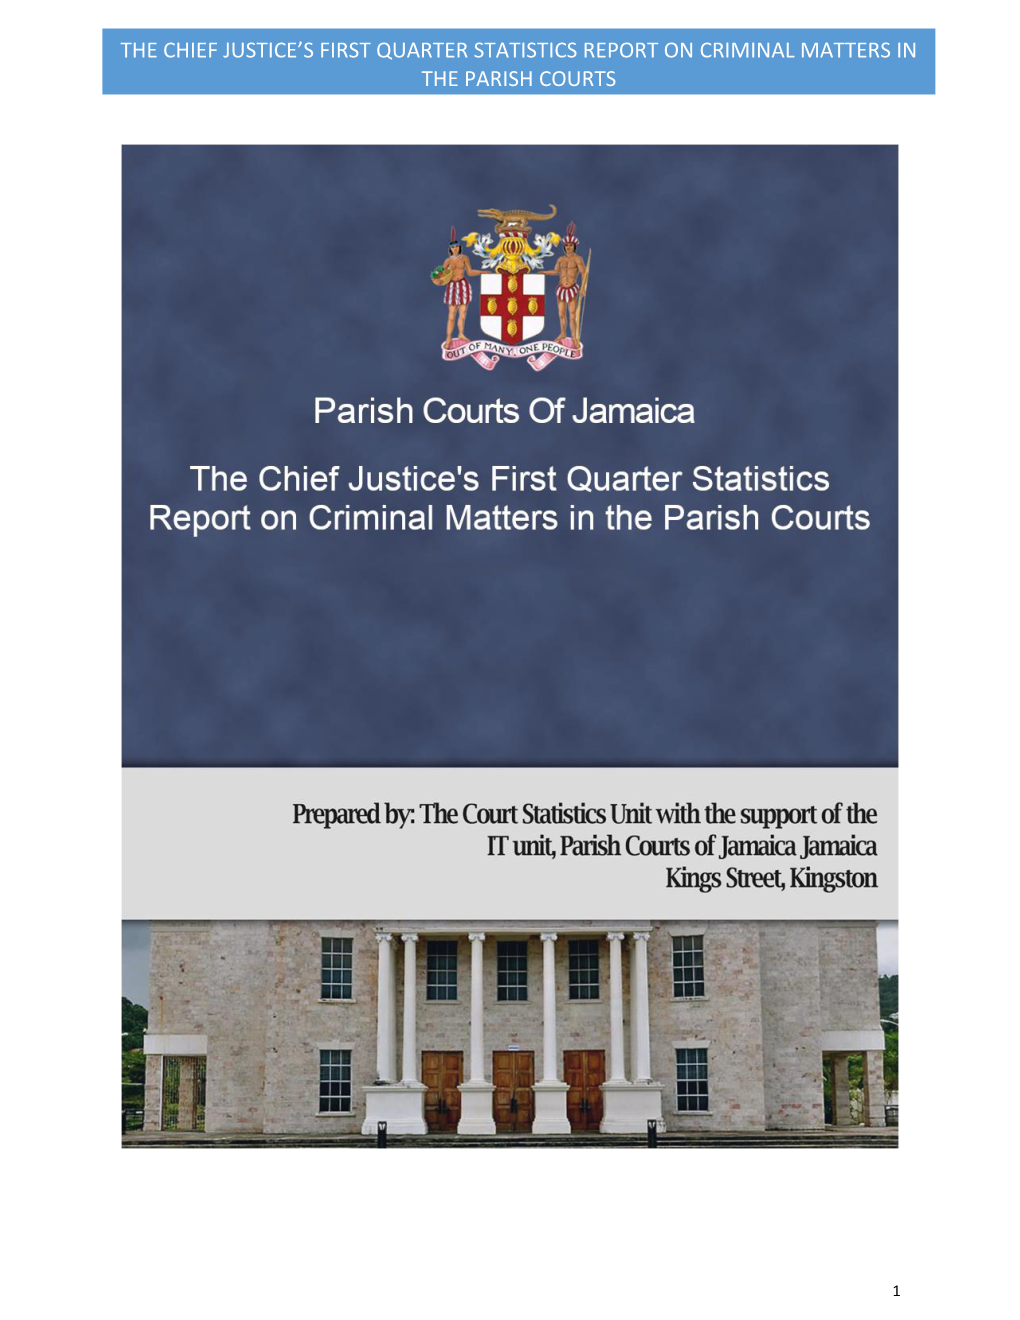 The Chief Justice's First Quarter Statistics Report on Criminal